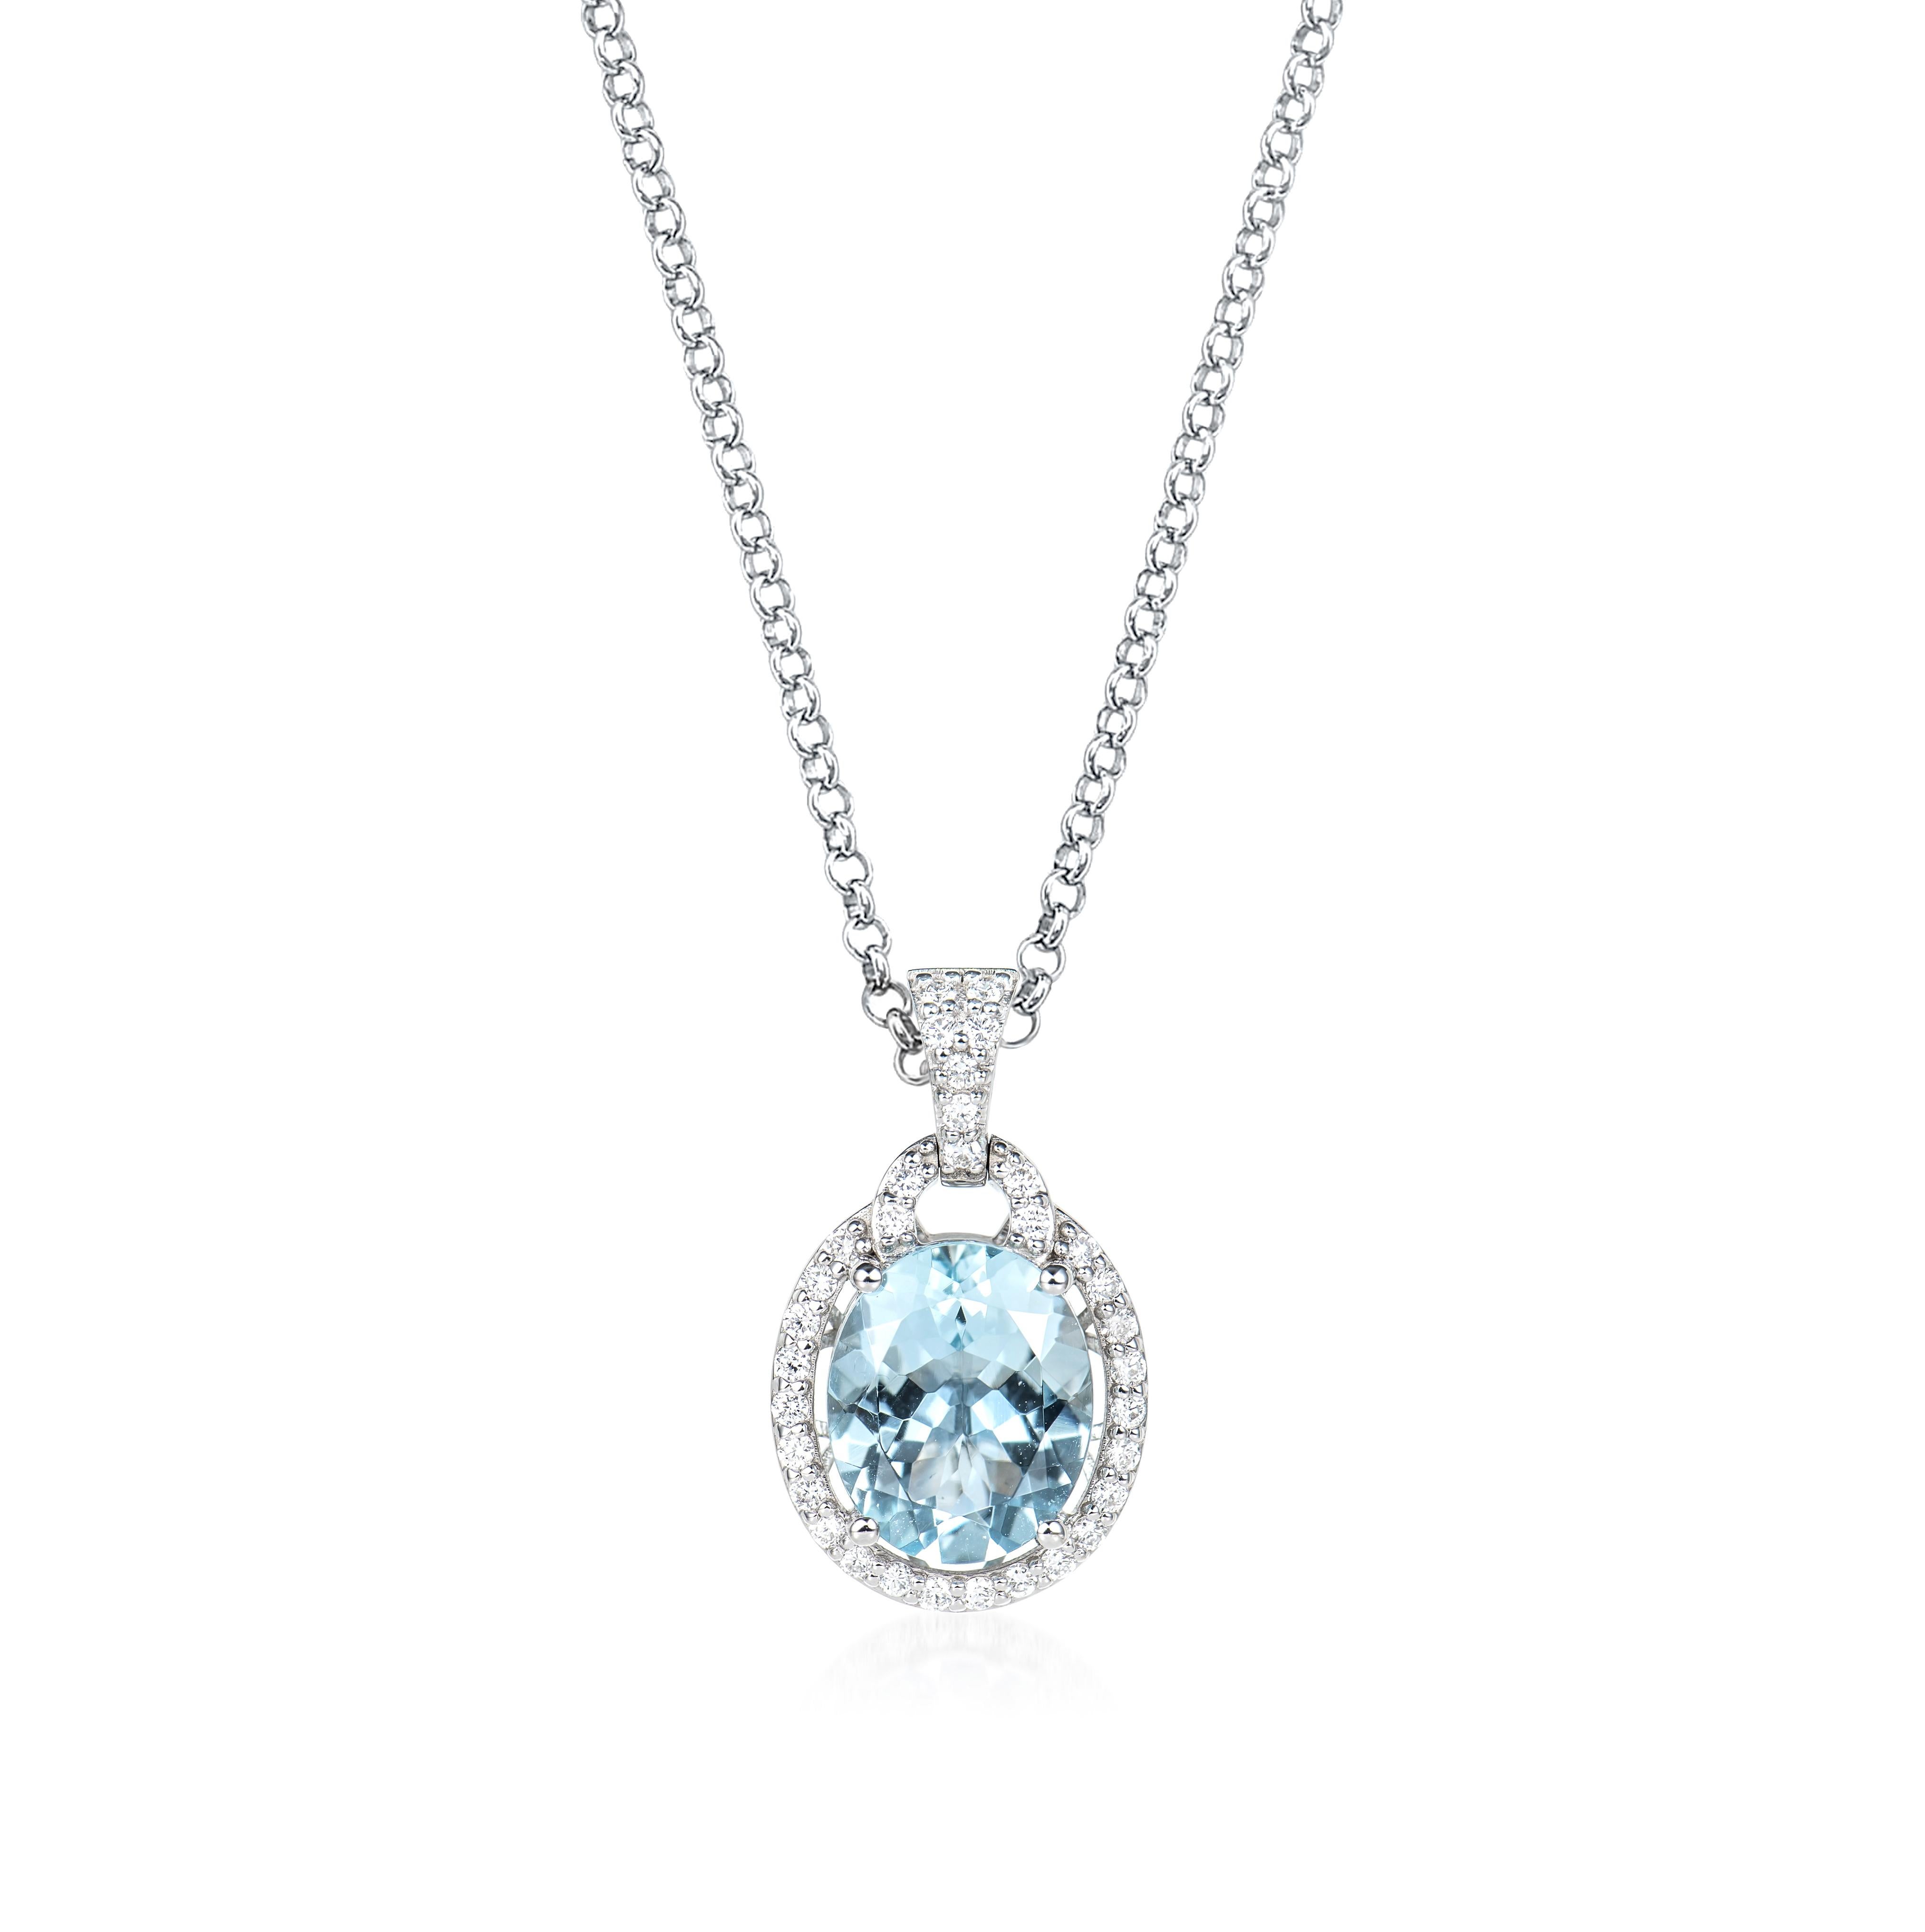 This collection features an array of aquamarines with an icy blue hue that is as cool as it gets! Accented with White Diamonds these Pendant are made in white gold and present a classic yet elegant look. 

Aquamarine Pendant in 18Karat White Gold